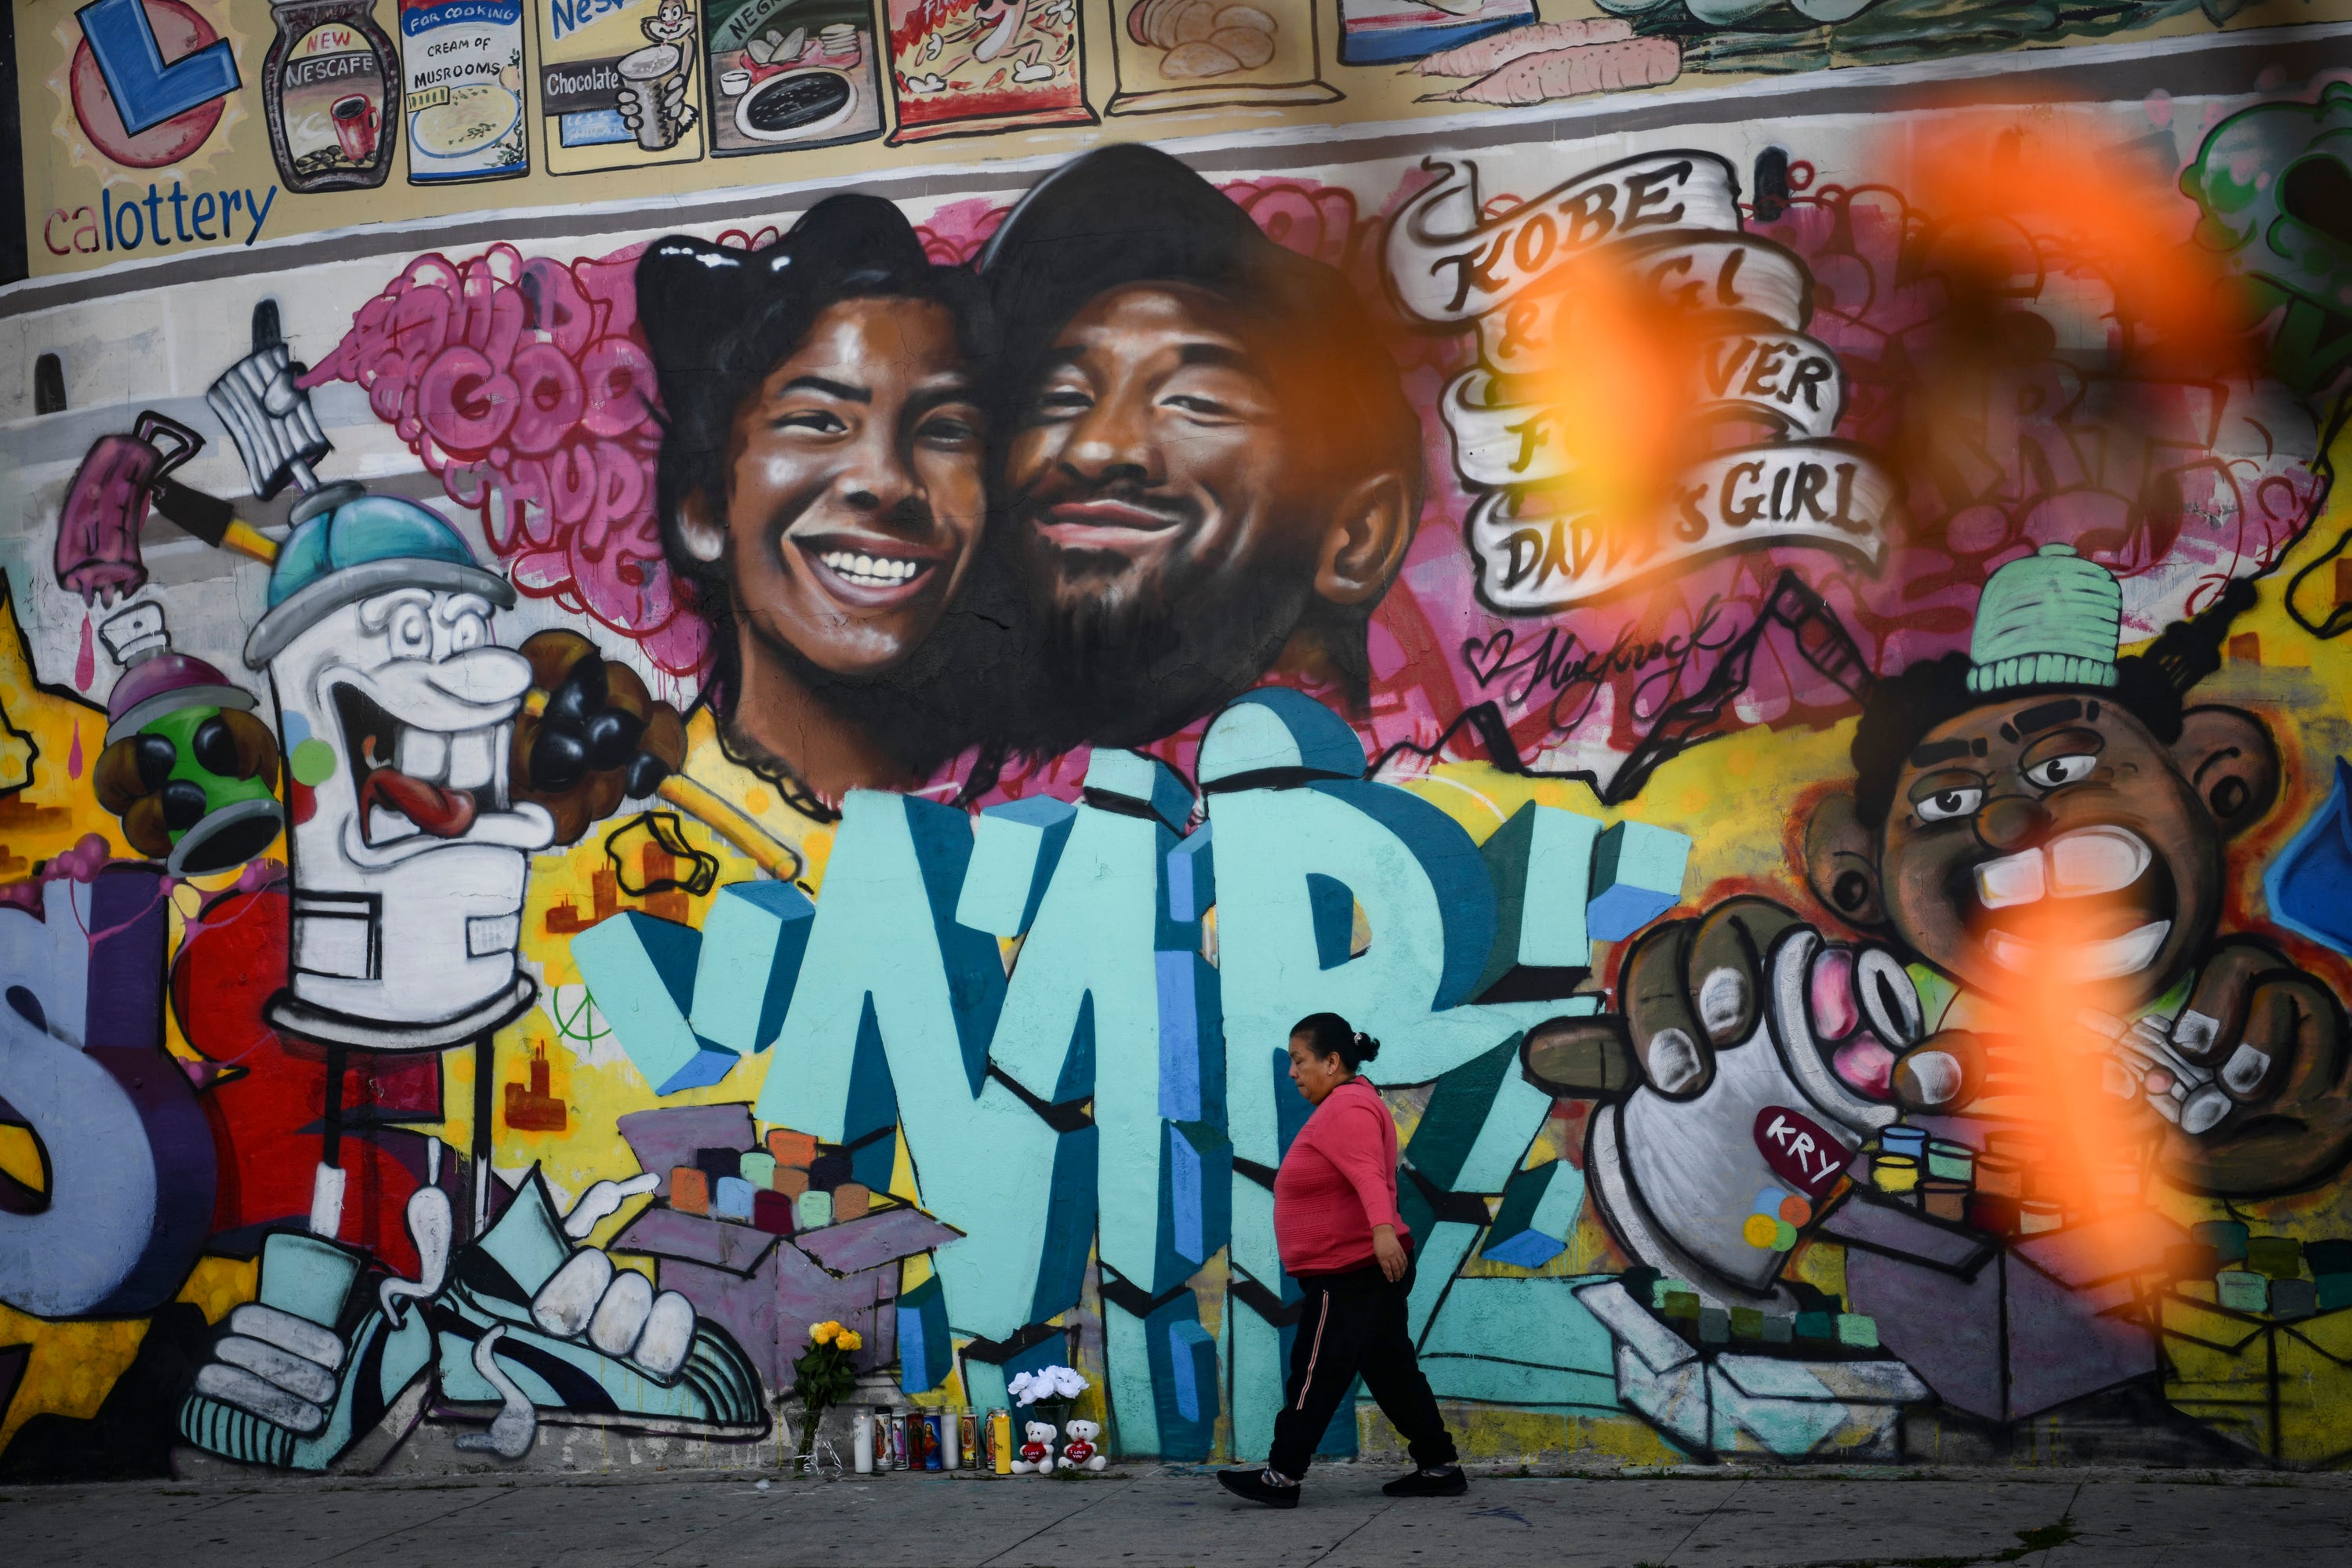 A woman walks past a mural of Kobe Bryant and daughter Gianna Bryant in Los Angeles.